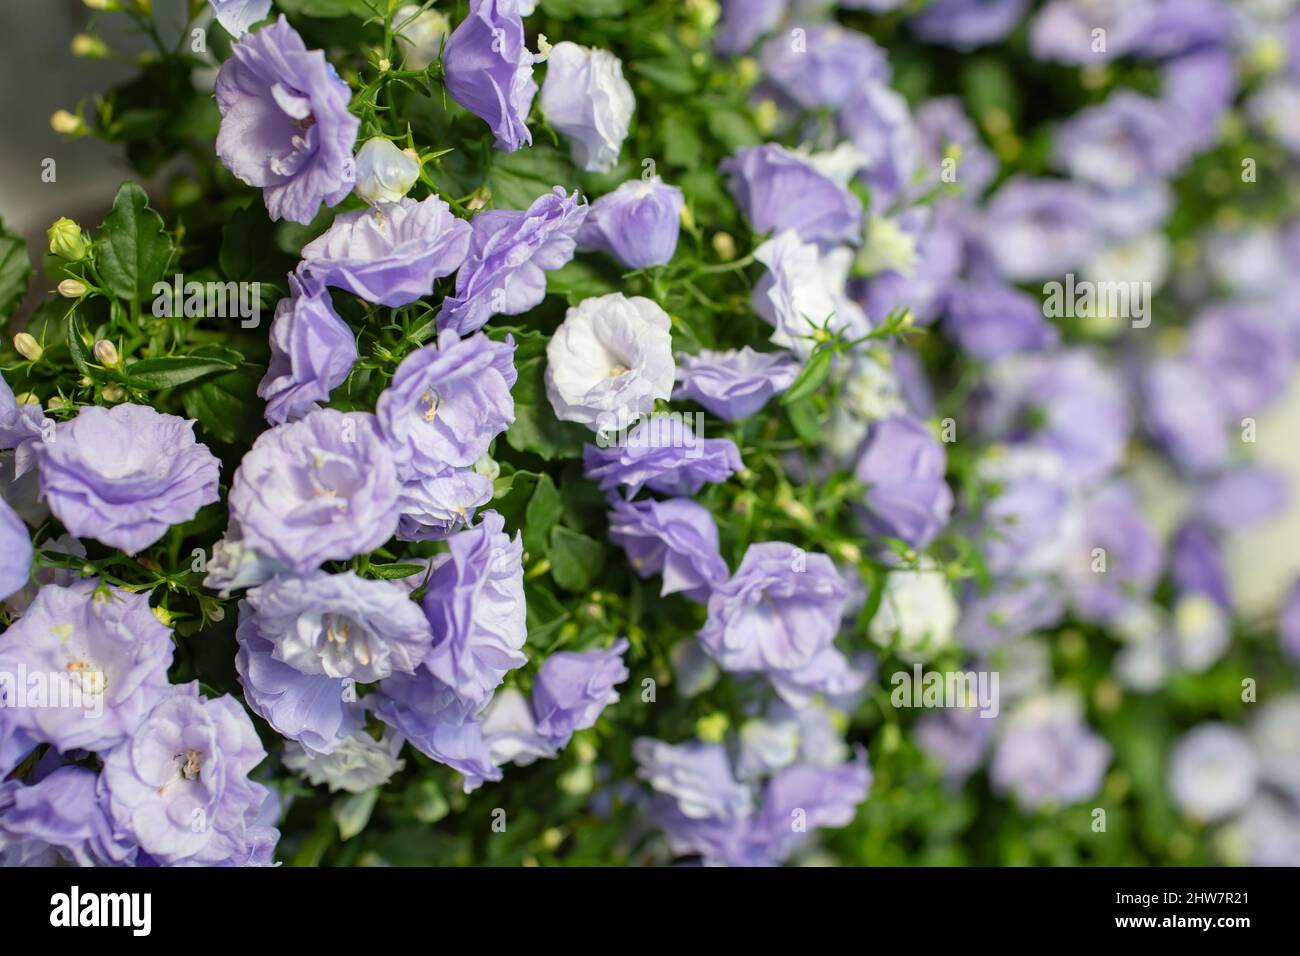 Campanula flowers, shallow depth of field side view Stock Photo